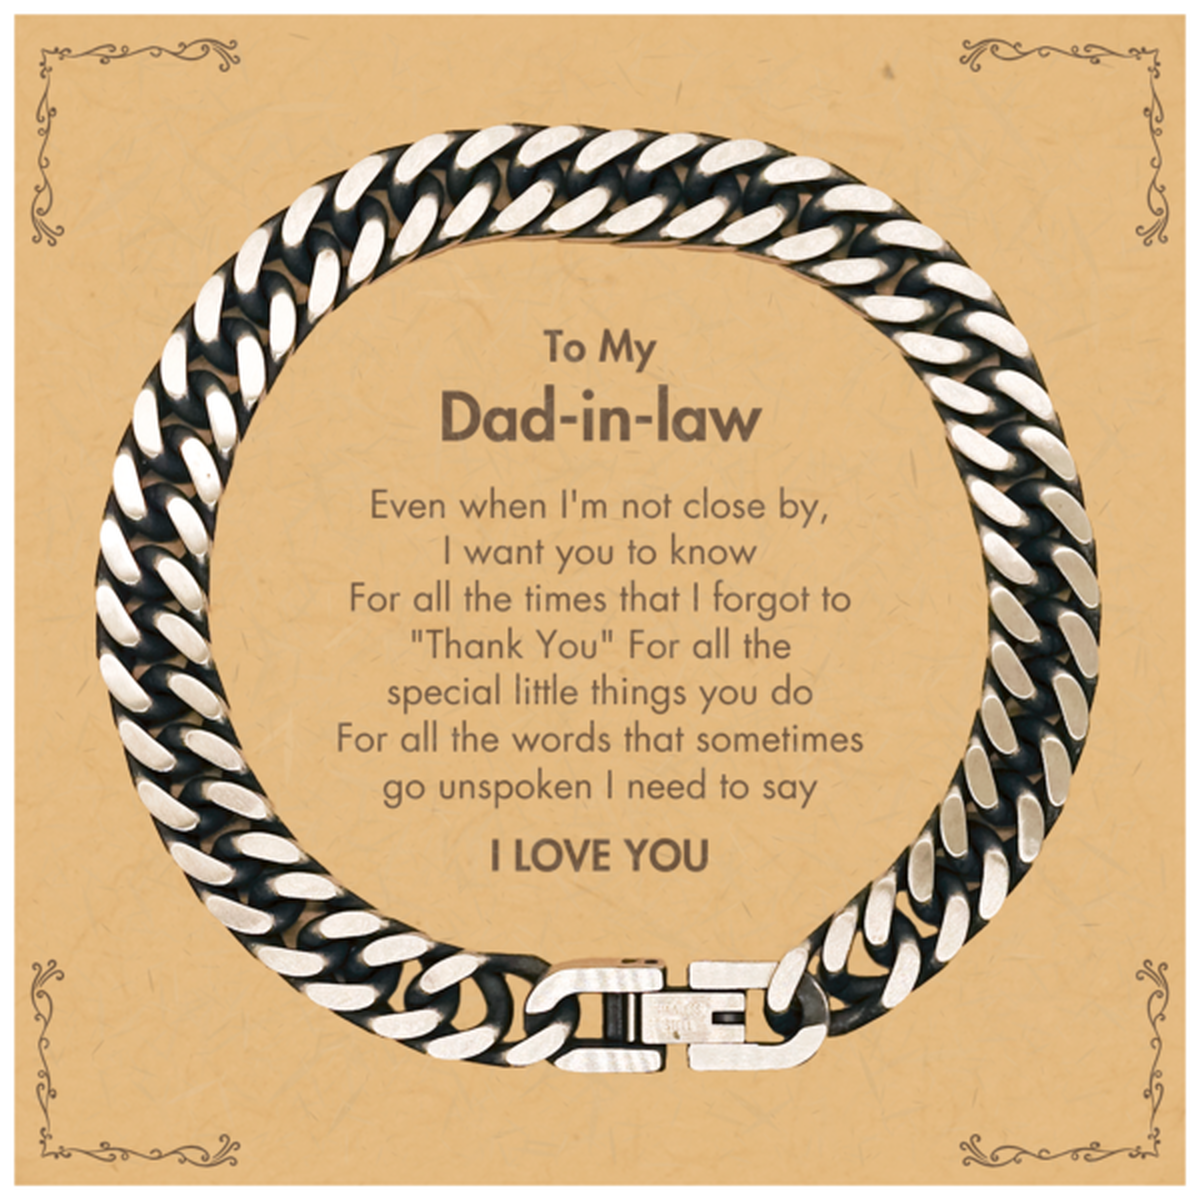 Thank You Gifts for Dad-in-law, Keepsake Cuban Link Chain Bracelet Gifts for Dad-in-law Birthday Mother's day Father's Day Dad-in-law For all the words That sometimes go unspoken I need to say I LOVE YOU